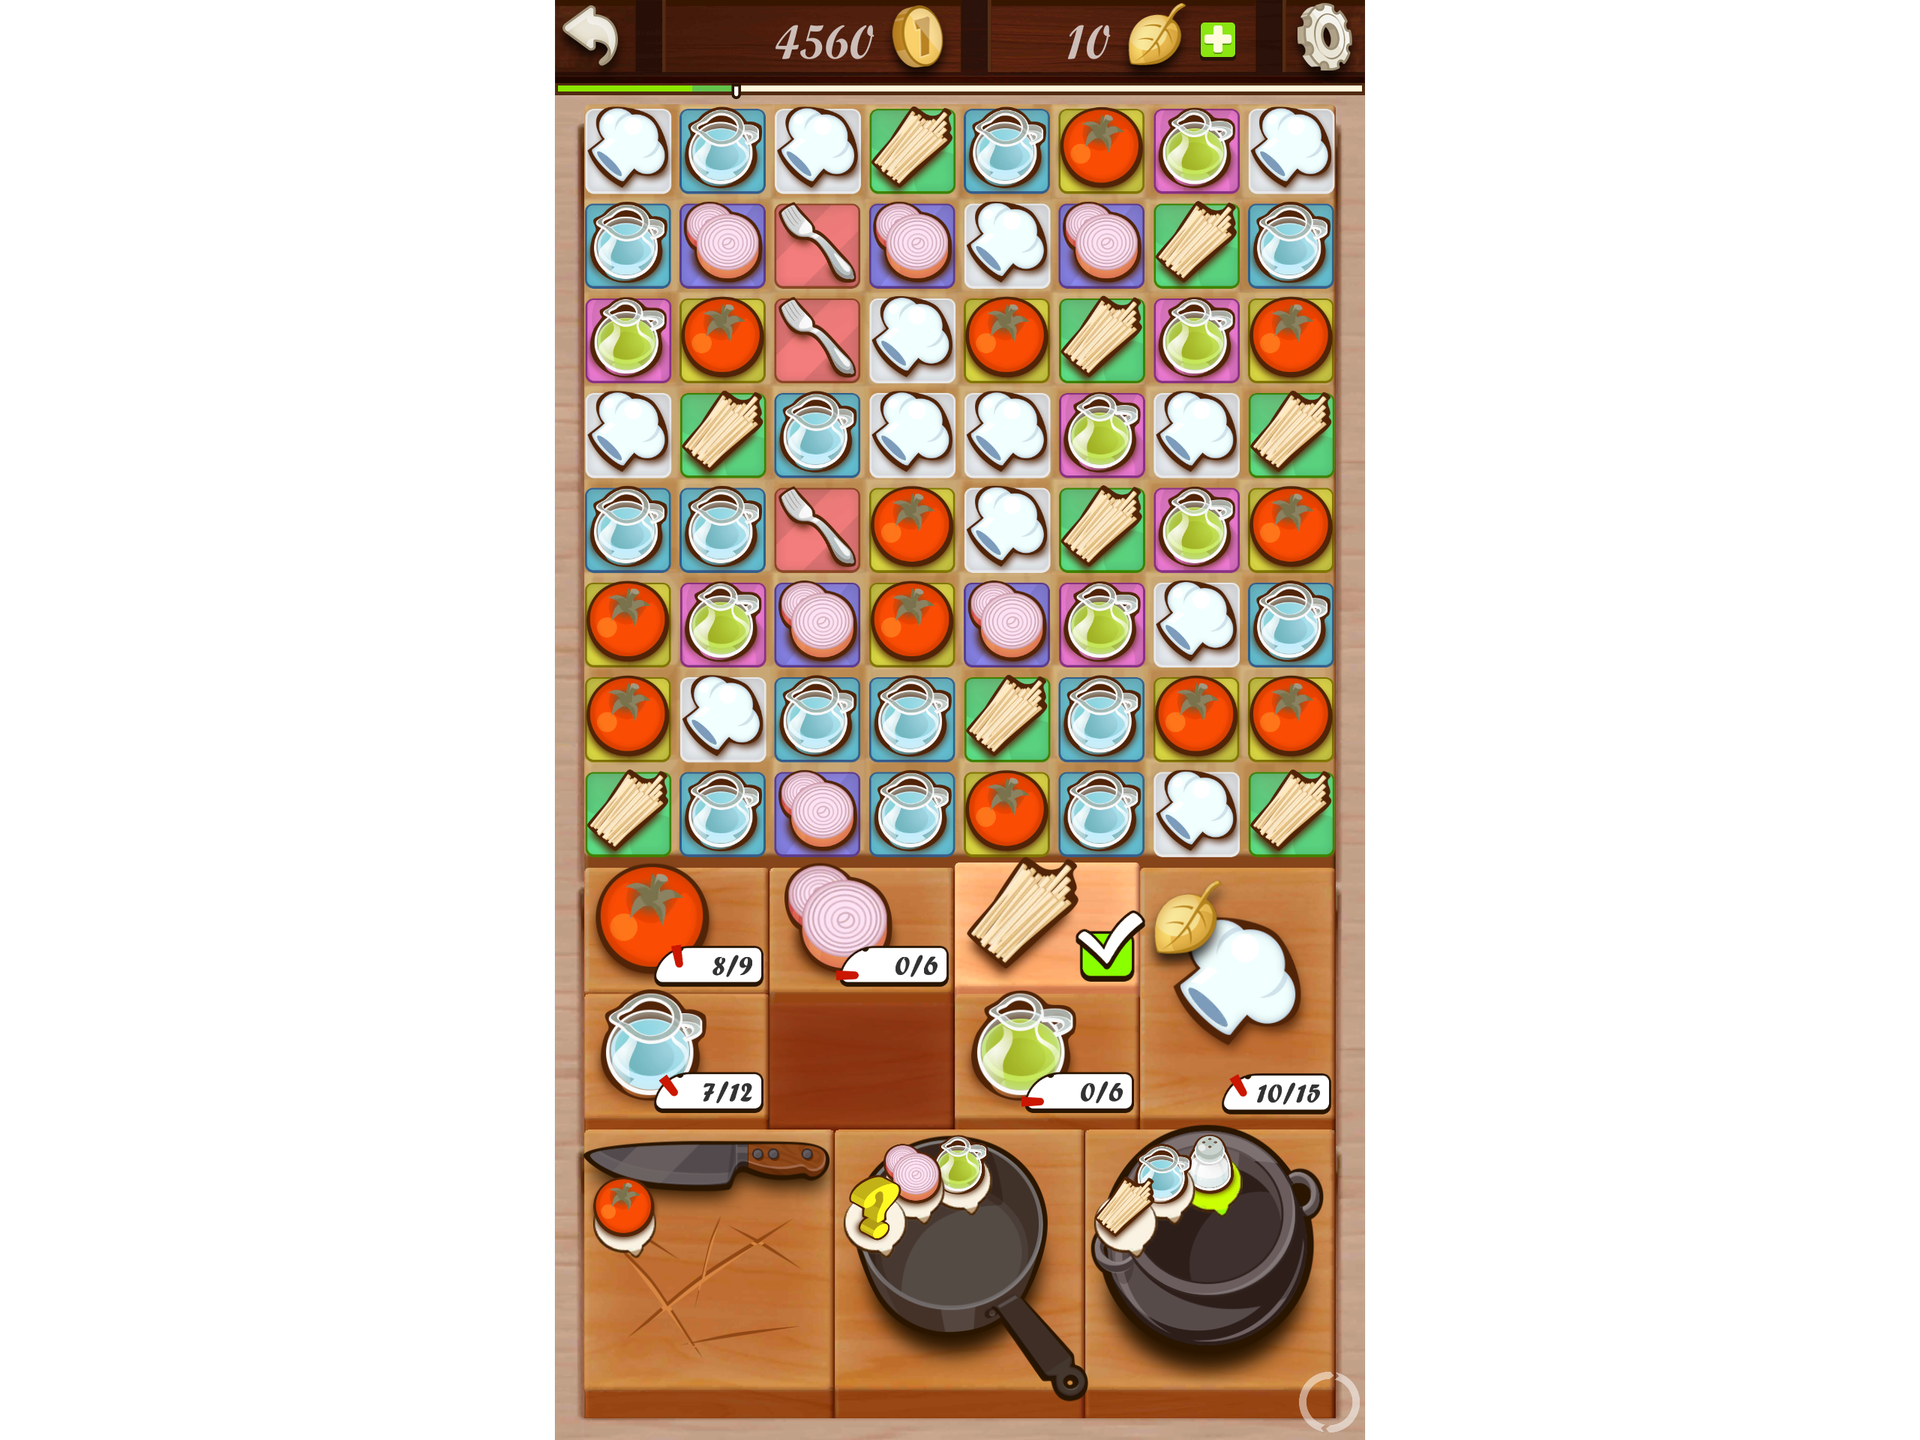 screenshot from "Artusi: Cooking Time", a match-three game